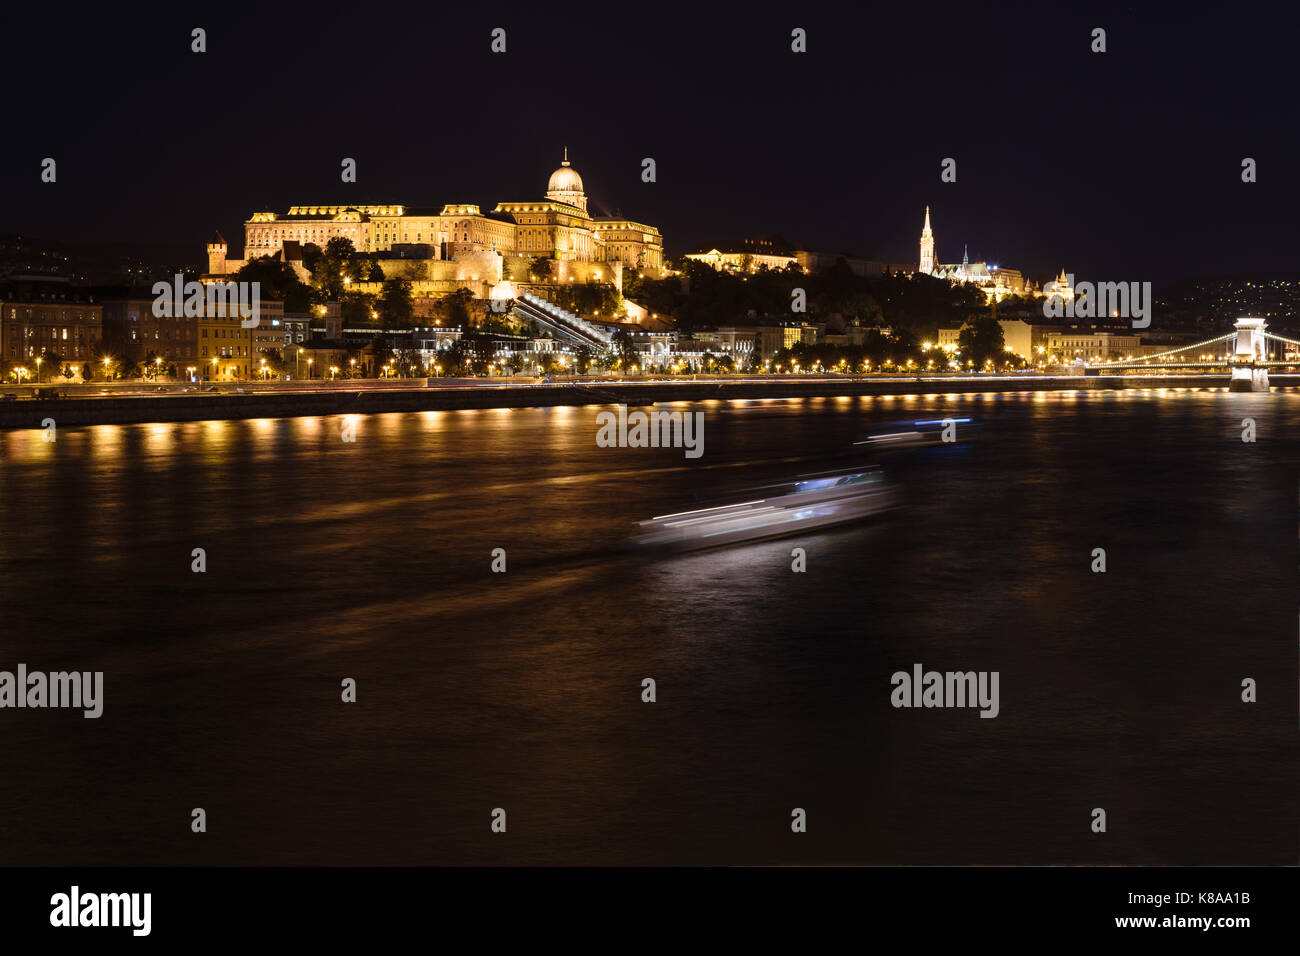 Night shot of the Danube and the Buda Castlel in Budapest, Hungary. Stock Photo